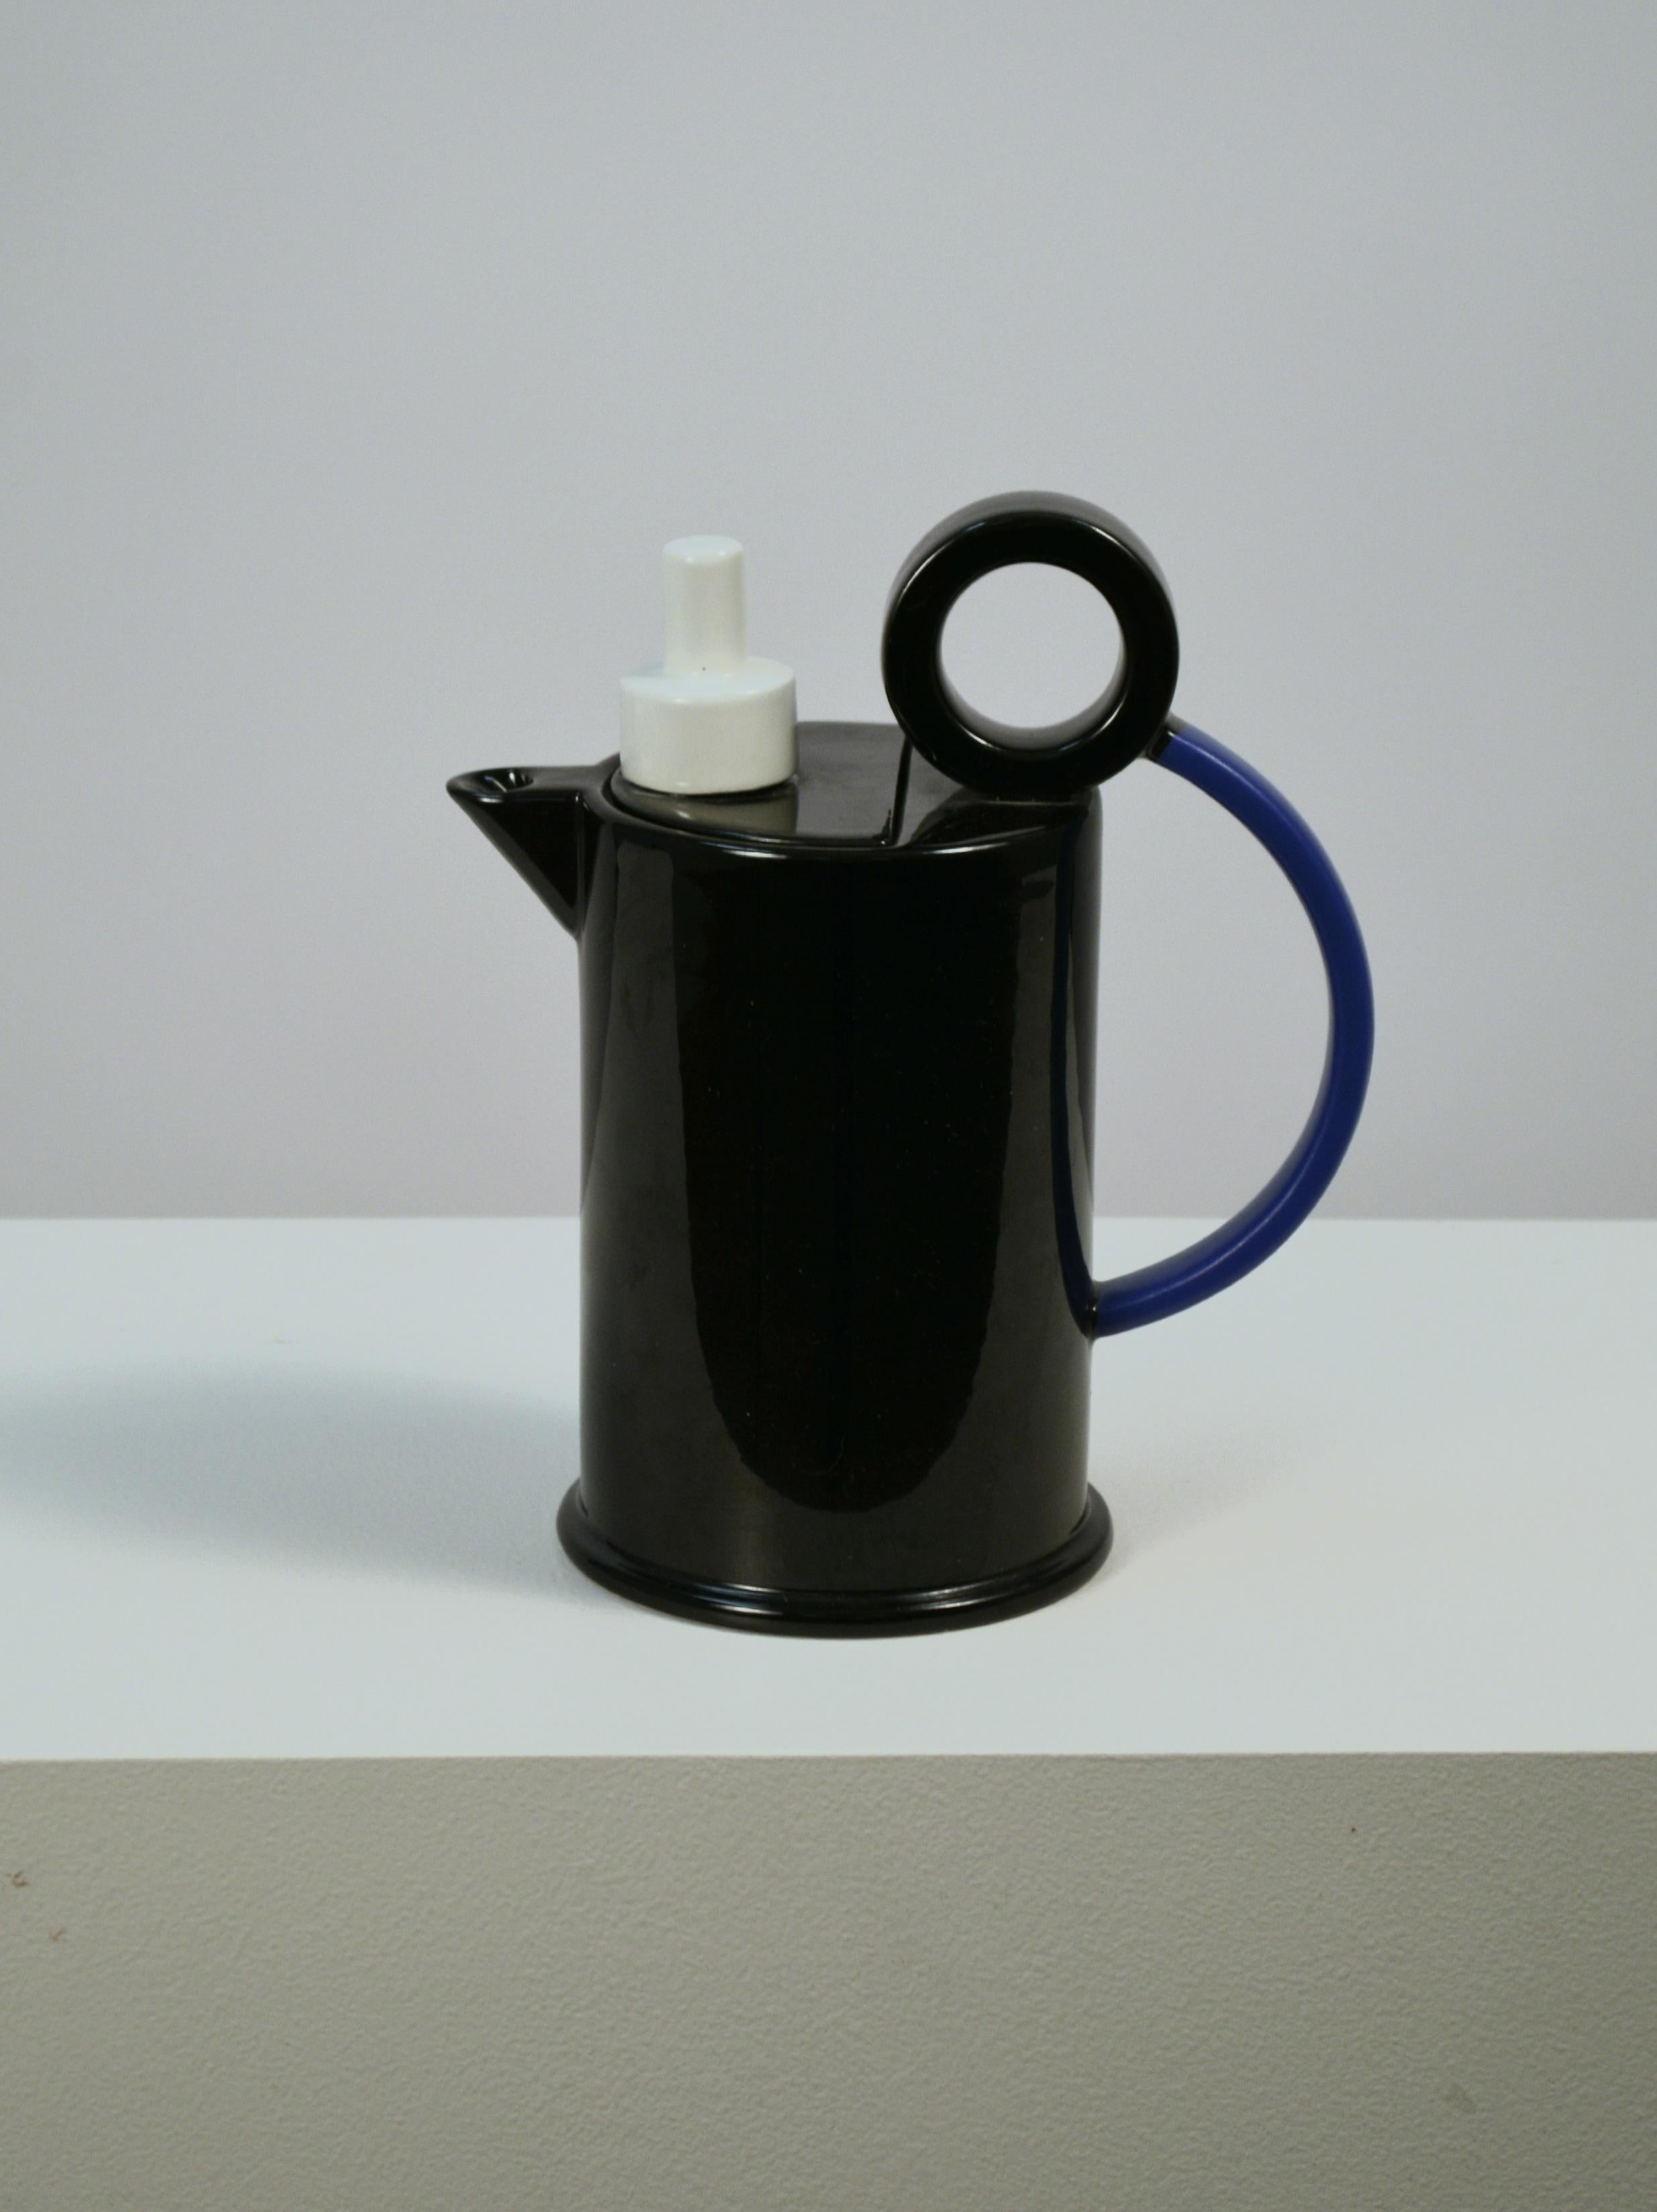 Tall Memphis style creamer designed by Marco Zanini for Bitossi, Italy in the 1980's. This functional piece of art features a locking fitted lid and sturdy handle design. It is part of a series of functional pieces designed by Zanini for Bitossi.